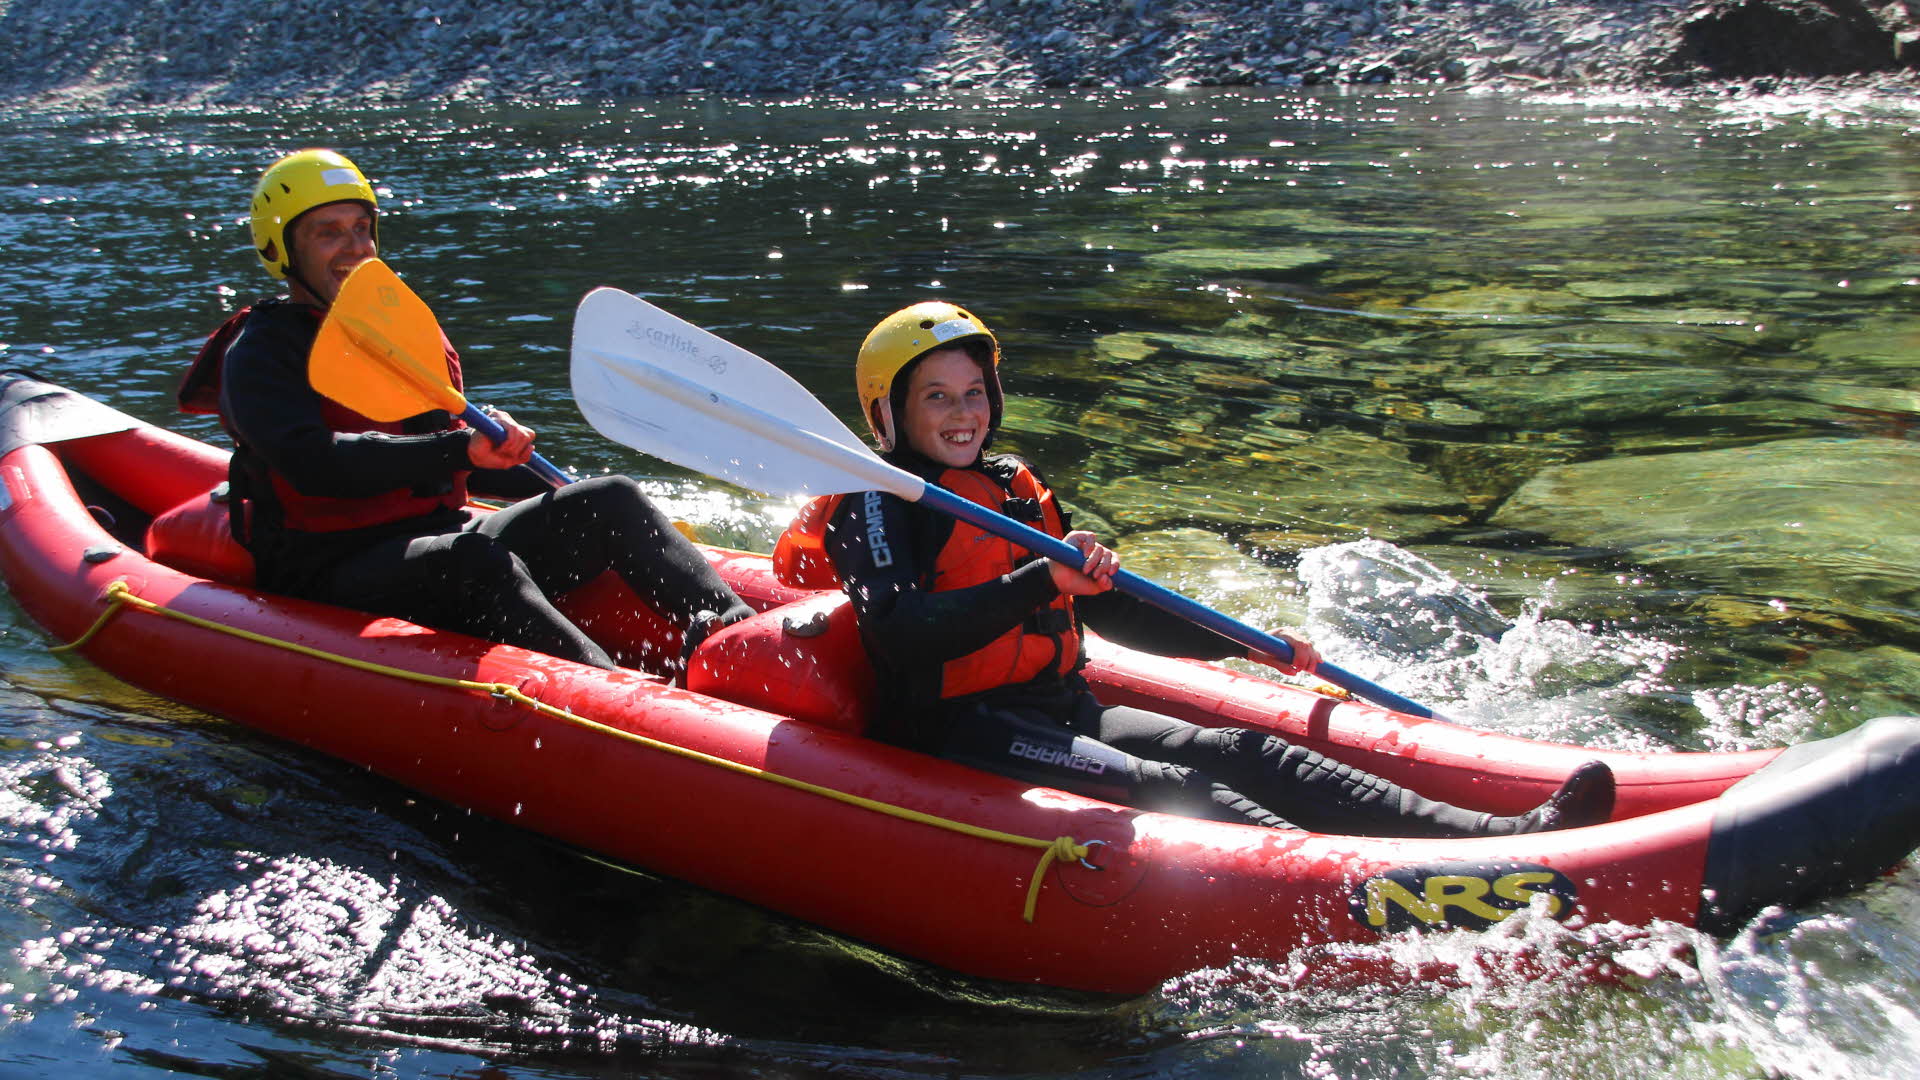 Two boys smiling in a red raft on a clear river. Holding paddles and wearing life jackets, helmets and wetsuits.